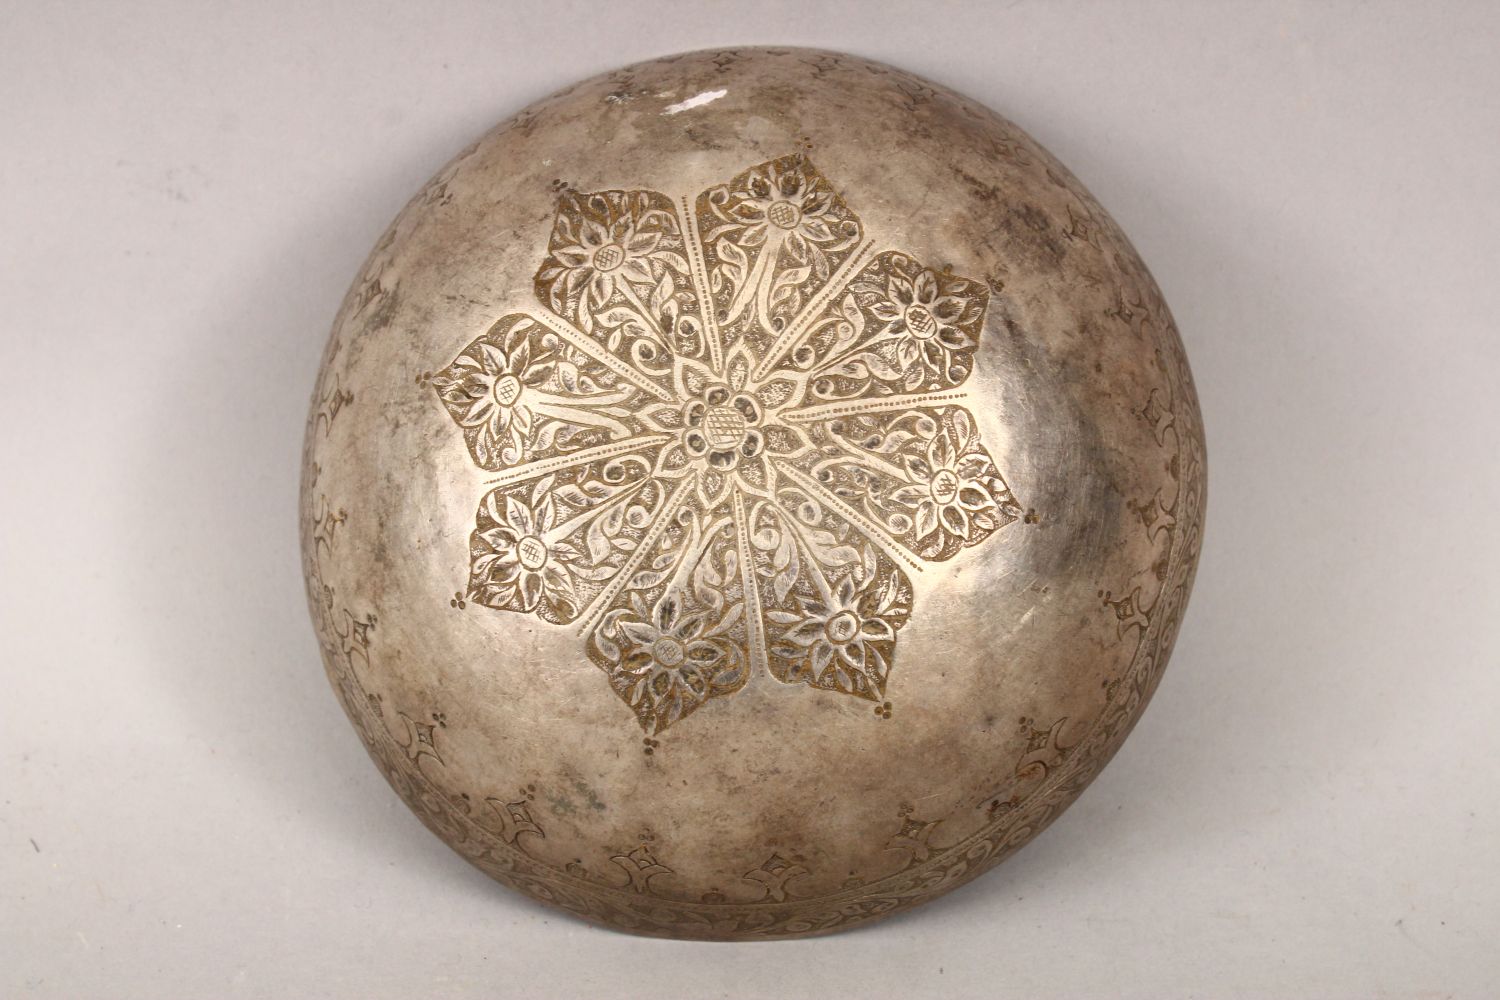 AN 19TH CENTURY ISLAMIC MALAYSIAN SILVER BOWL, the exterior engraved with scrolling foliate - Image 3 of 3